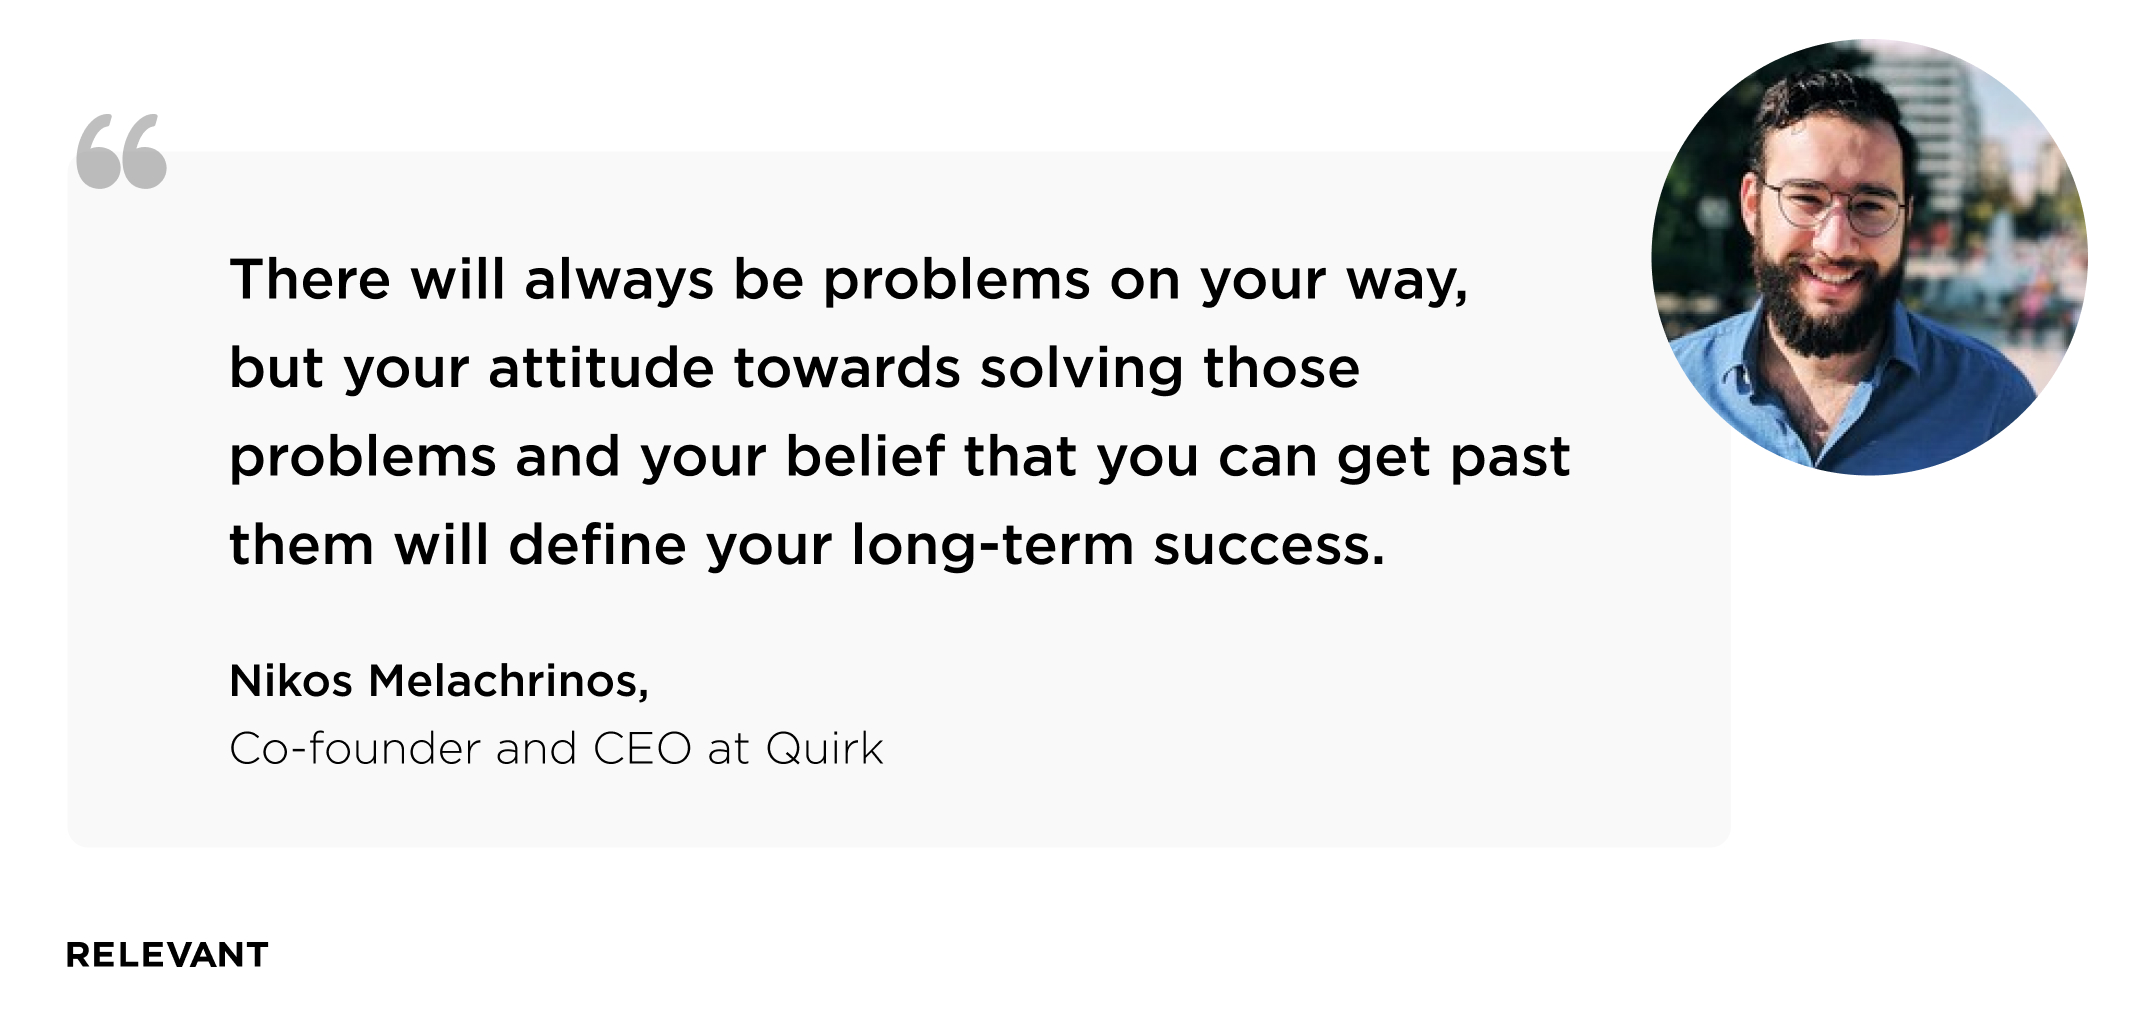 Nikos Melachrinos, co-founder and CEO at Quirk